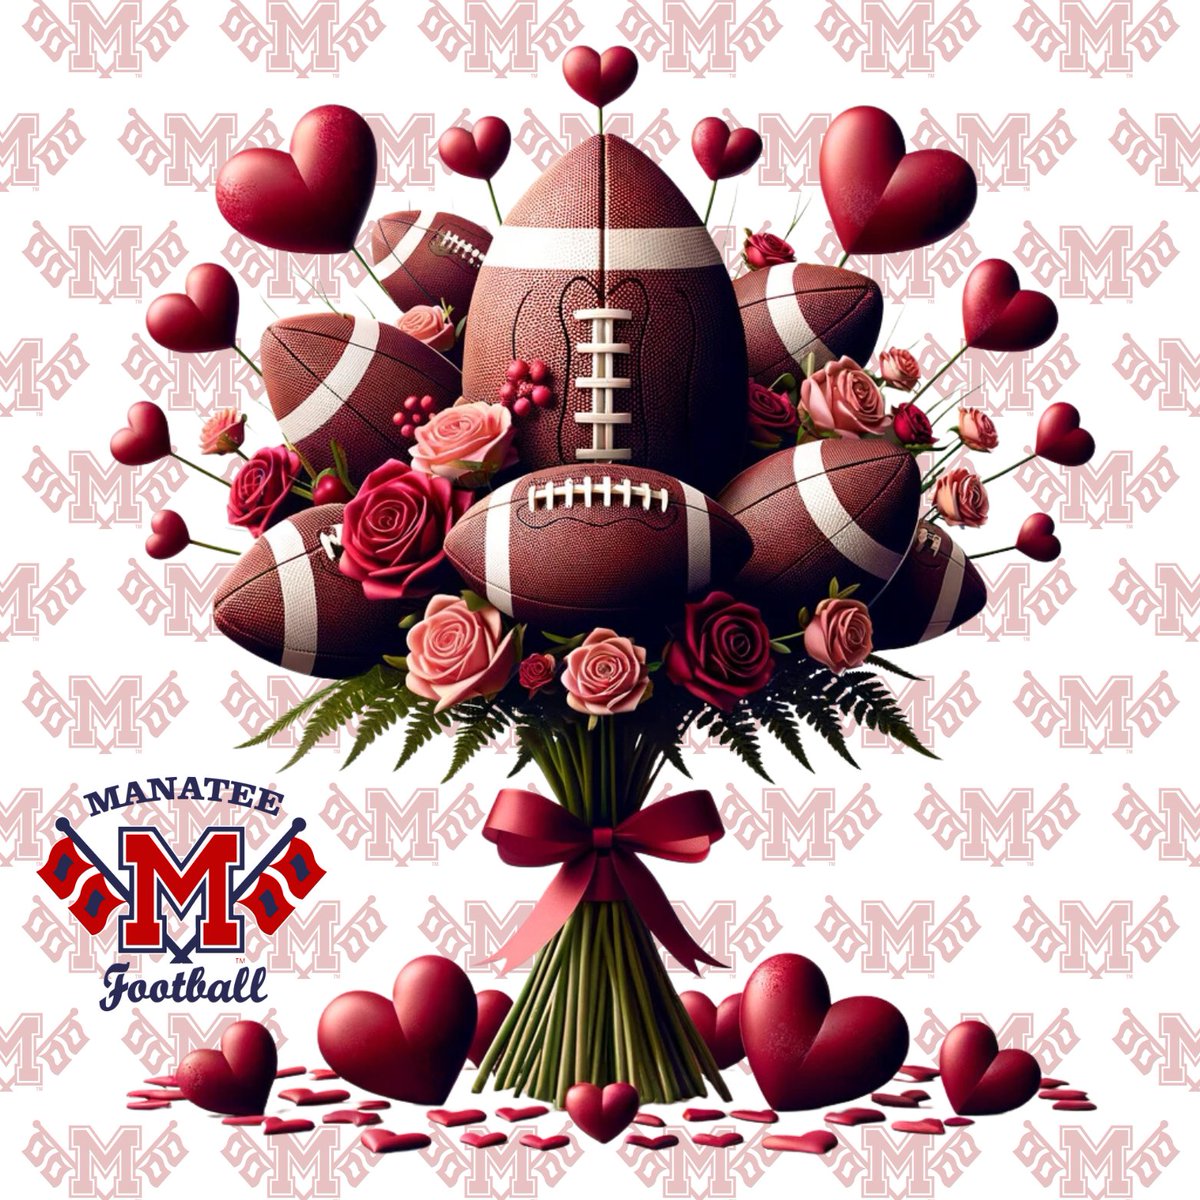 💙🏈 Happy Valentine's Day from Manatee Football! Today, we celebrate the heart and passion that unites us all, on and off the field. May your day be filled with love, joy, and touchdowns. Here's to the love of the game and our incredible fans. #ValentinesDay #LoveTheGame